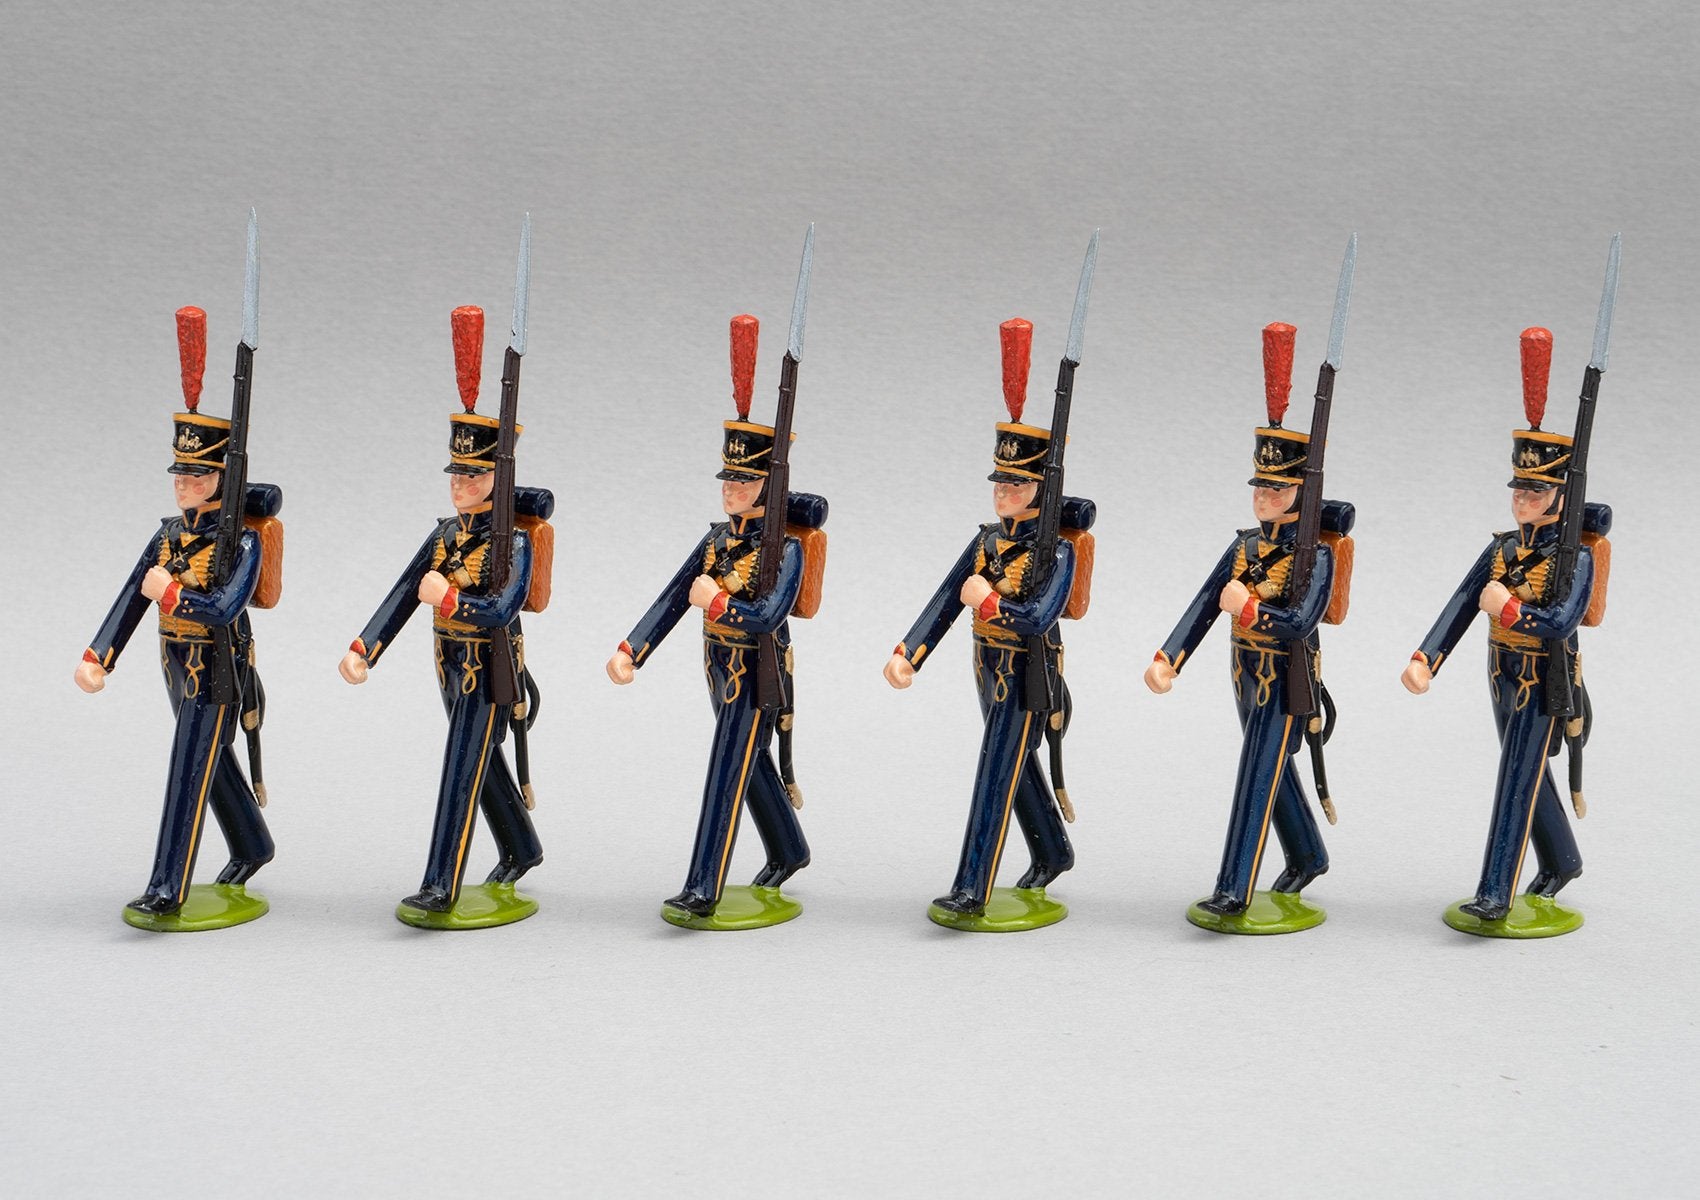 Set 125a Seamen of the Guard | French Infantry | Napoleonic Wars | Marins de la Garde French Naval Infantry. This set comprises six men marching at slope arms | Waterloo | © Imperial Productions | Sculpt by David Cowe